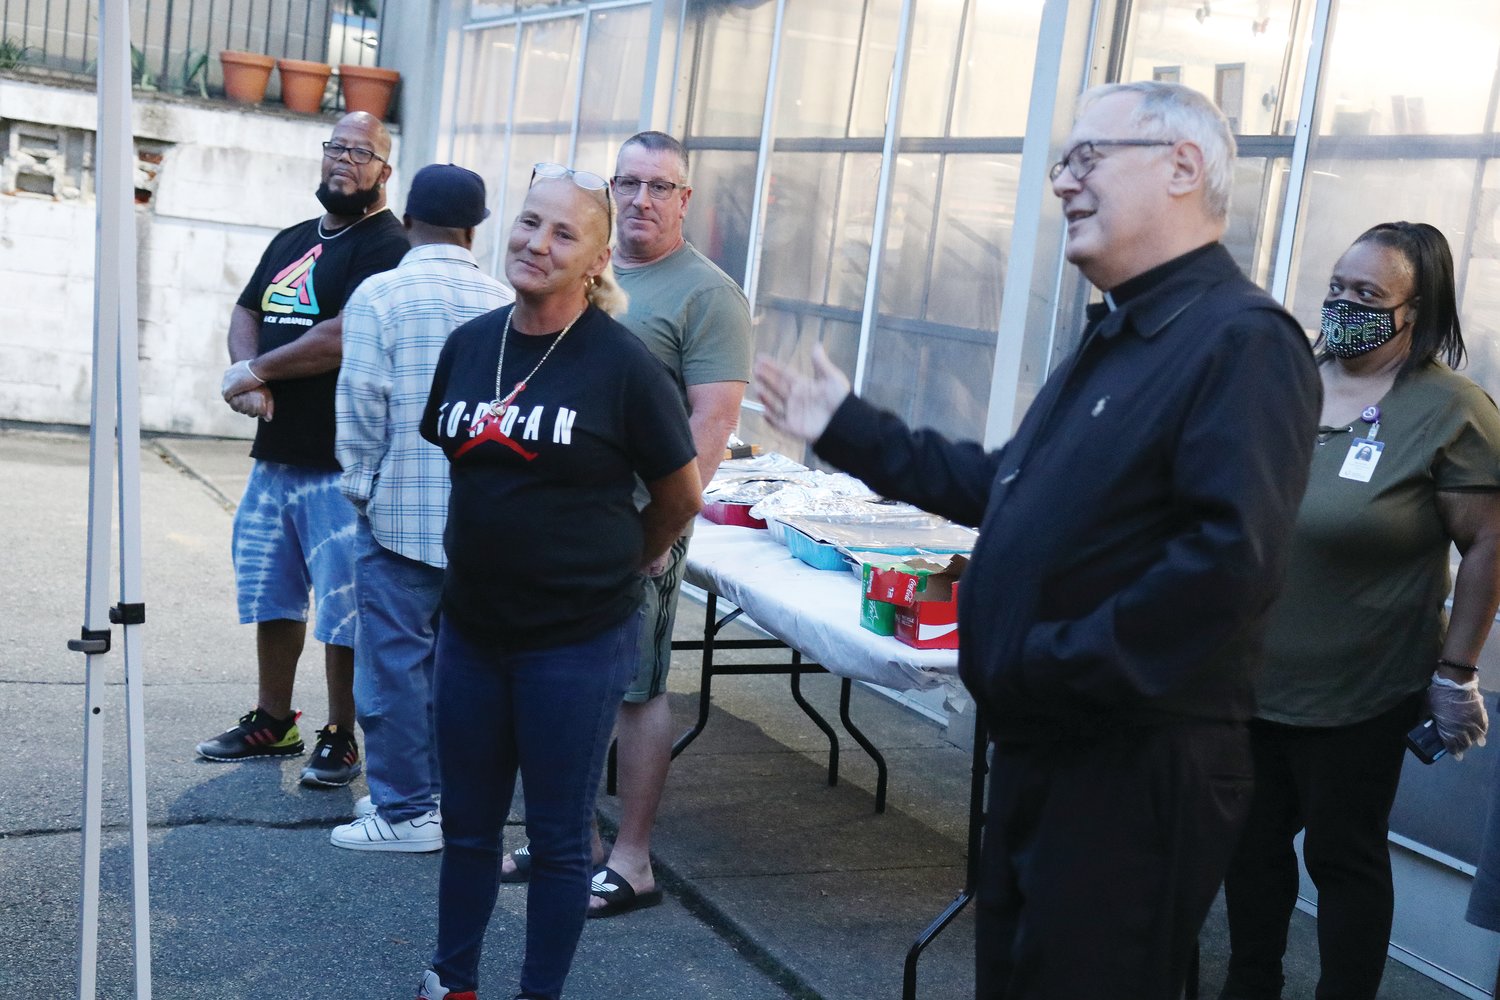 Bishop Thomas J. Tobin announces the 150 Acts of Charity initiative during a cookout to honor Emmanuel House Site Manager Dotty Perrault, and the staff and volunteers who keep the shelter operational.